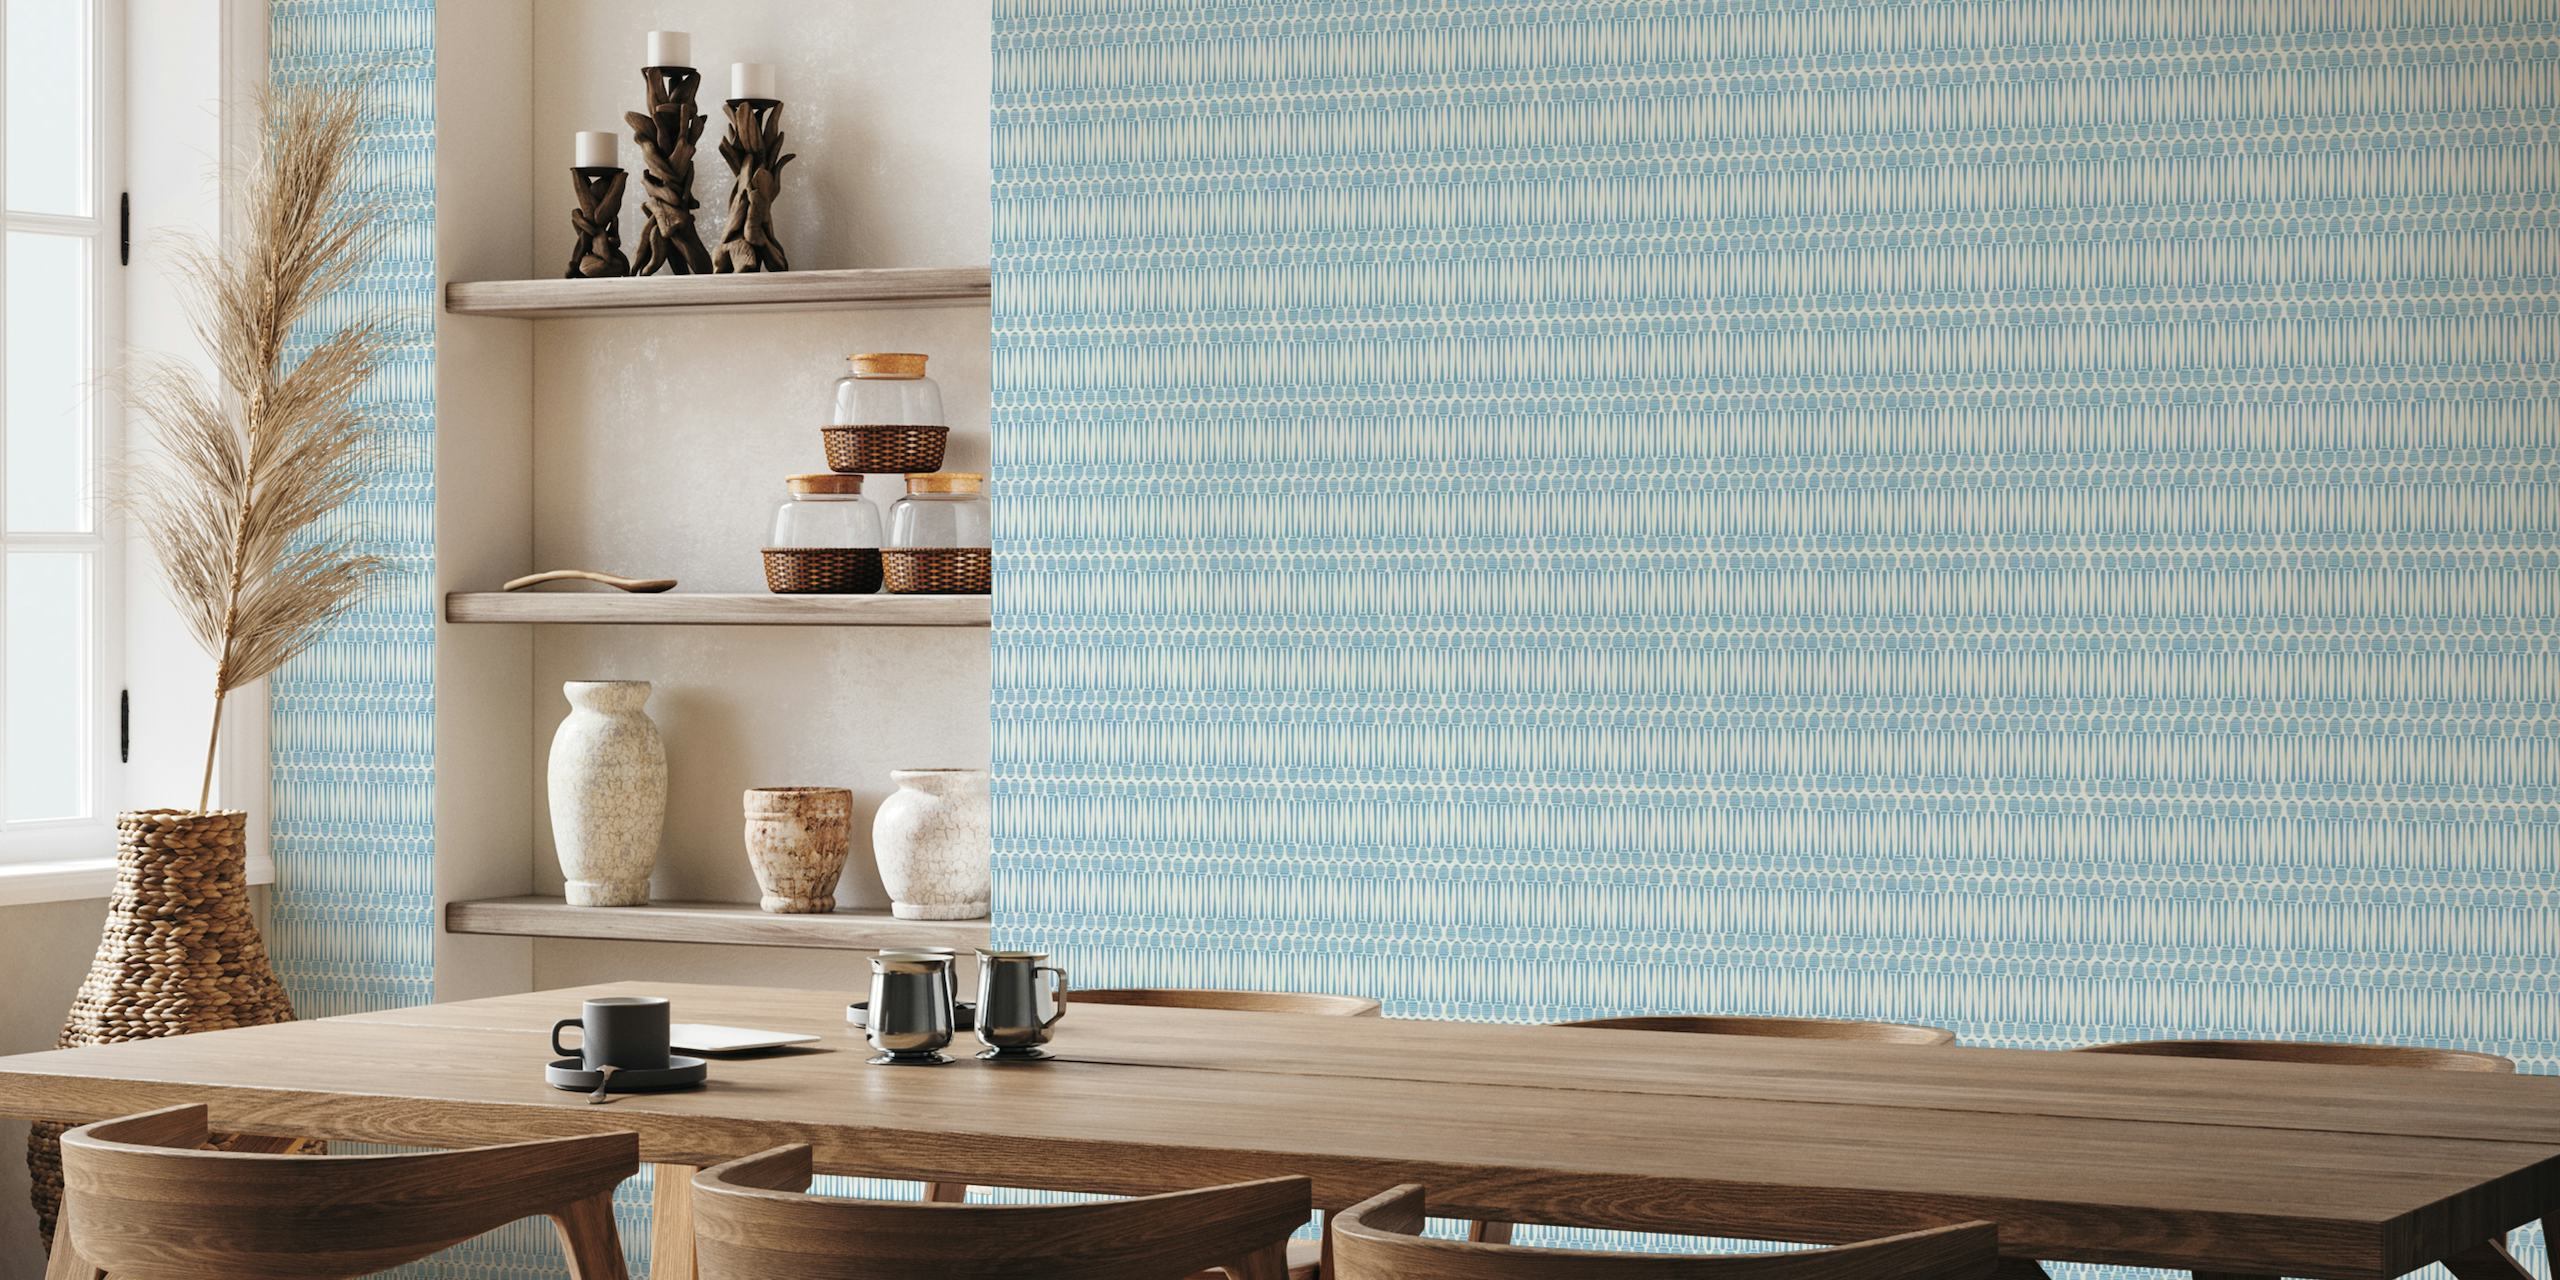 Honey Dippers Graphic Stripe in sky blue tapetit